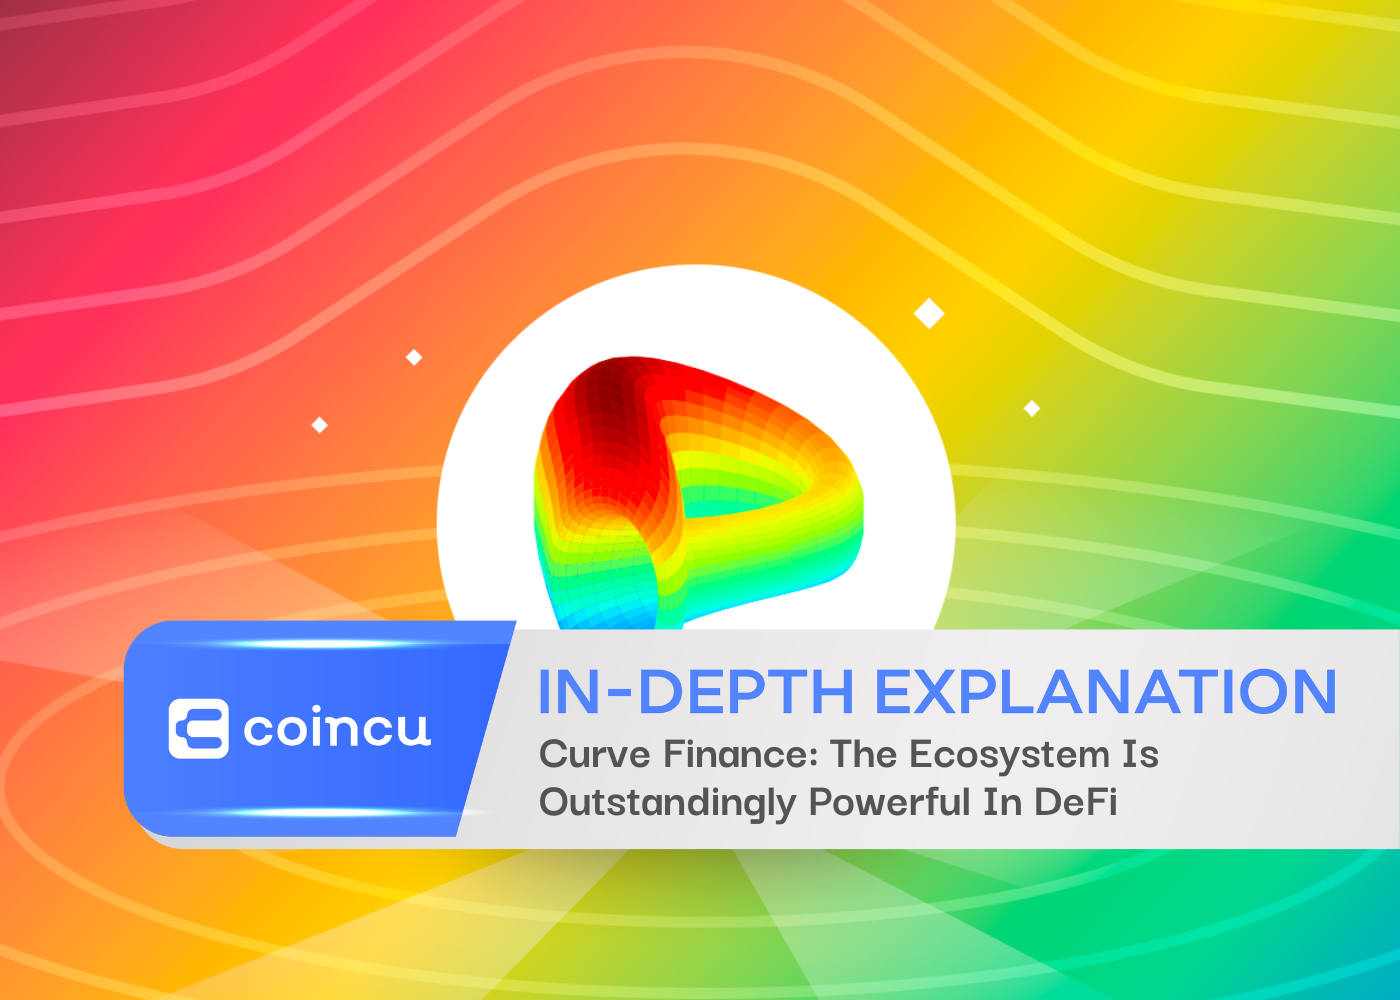 Curve Finance: The Ecosystem Is Outstandingly Powerful In DeFi